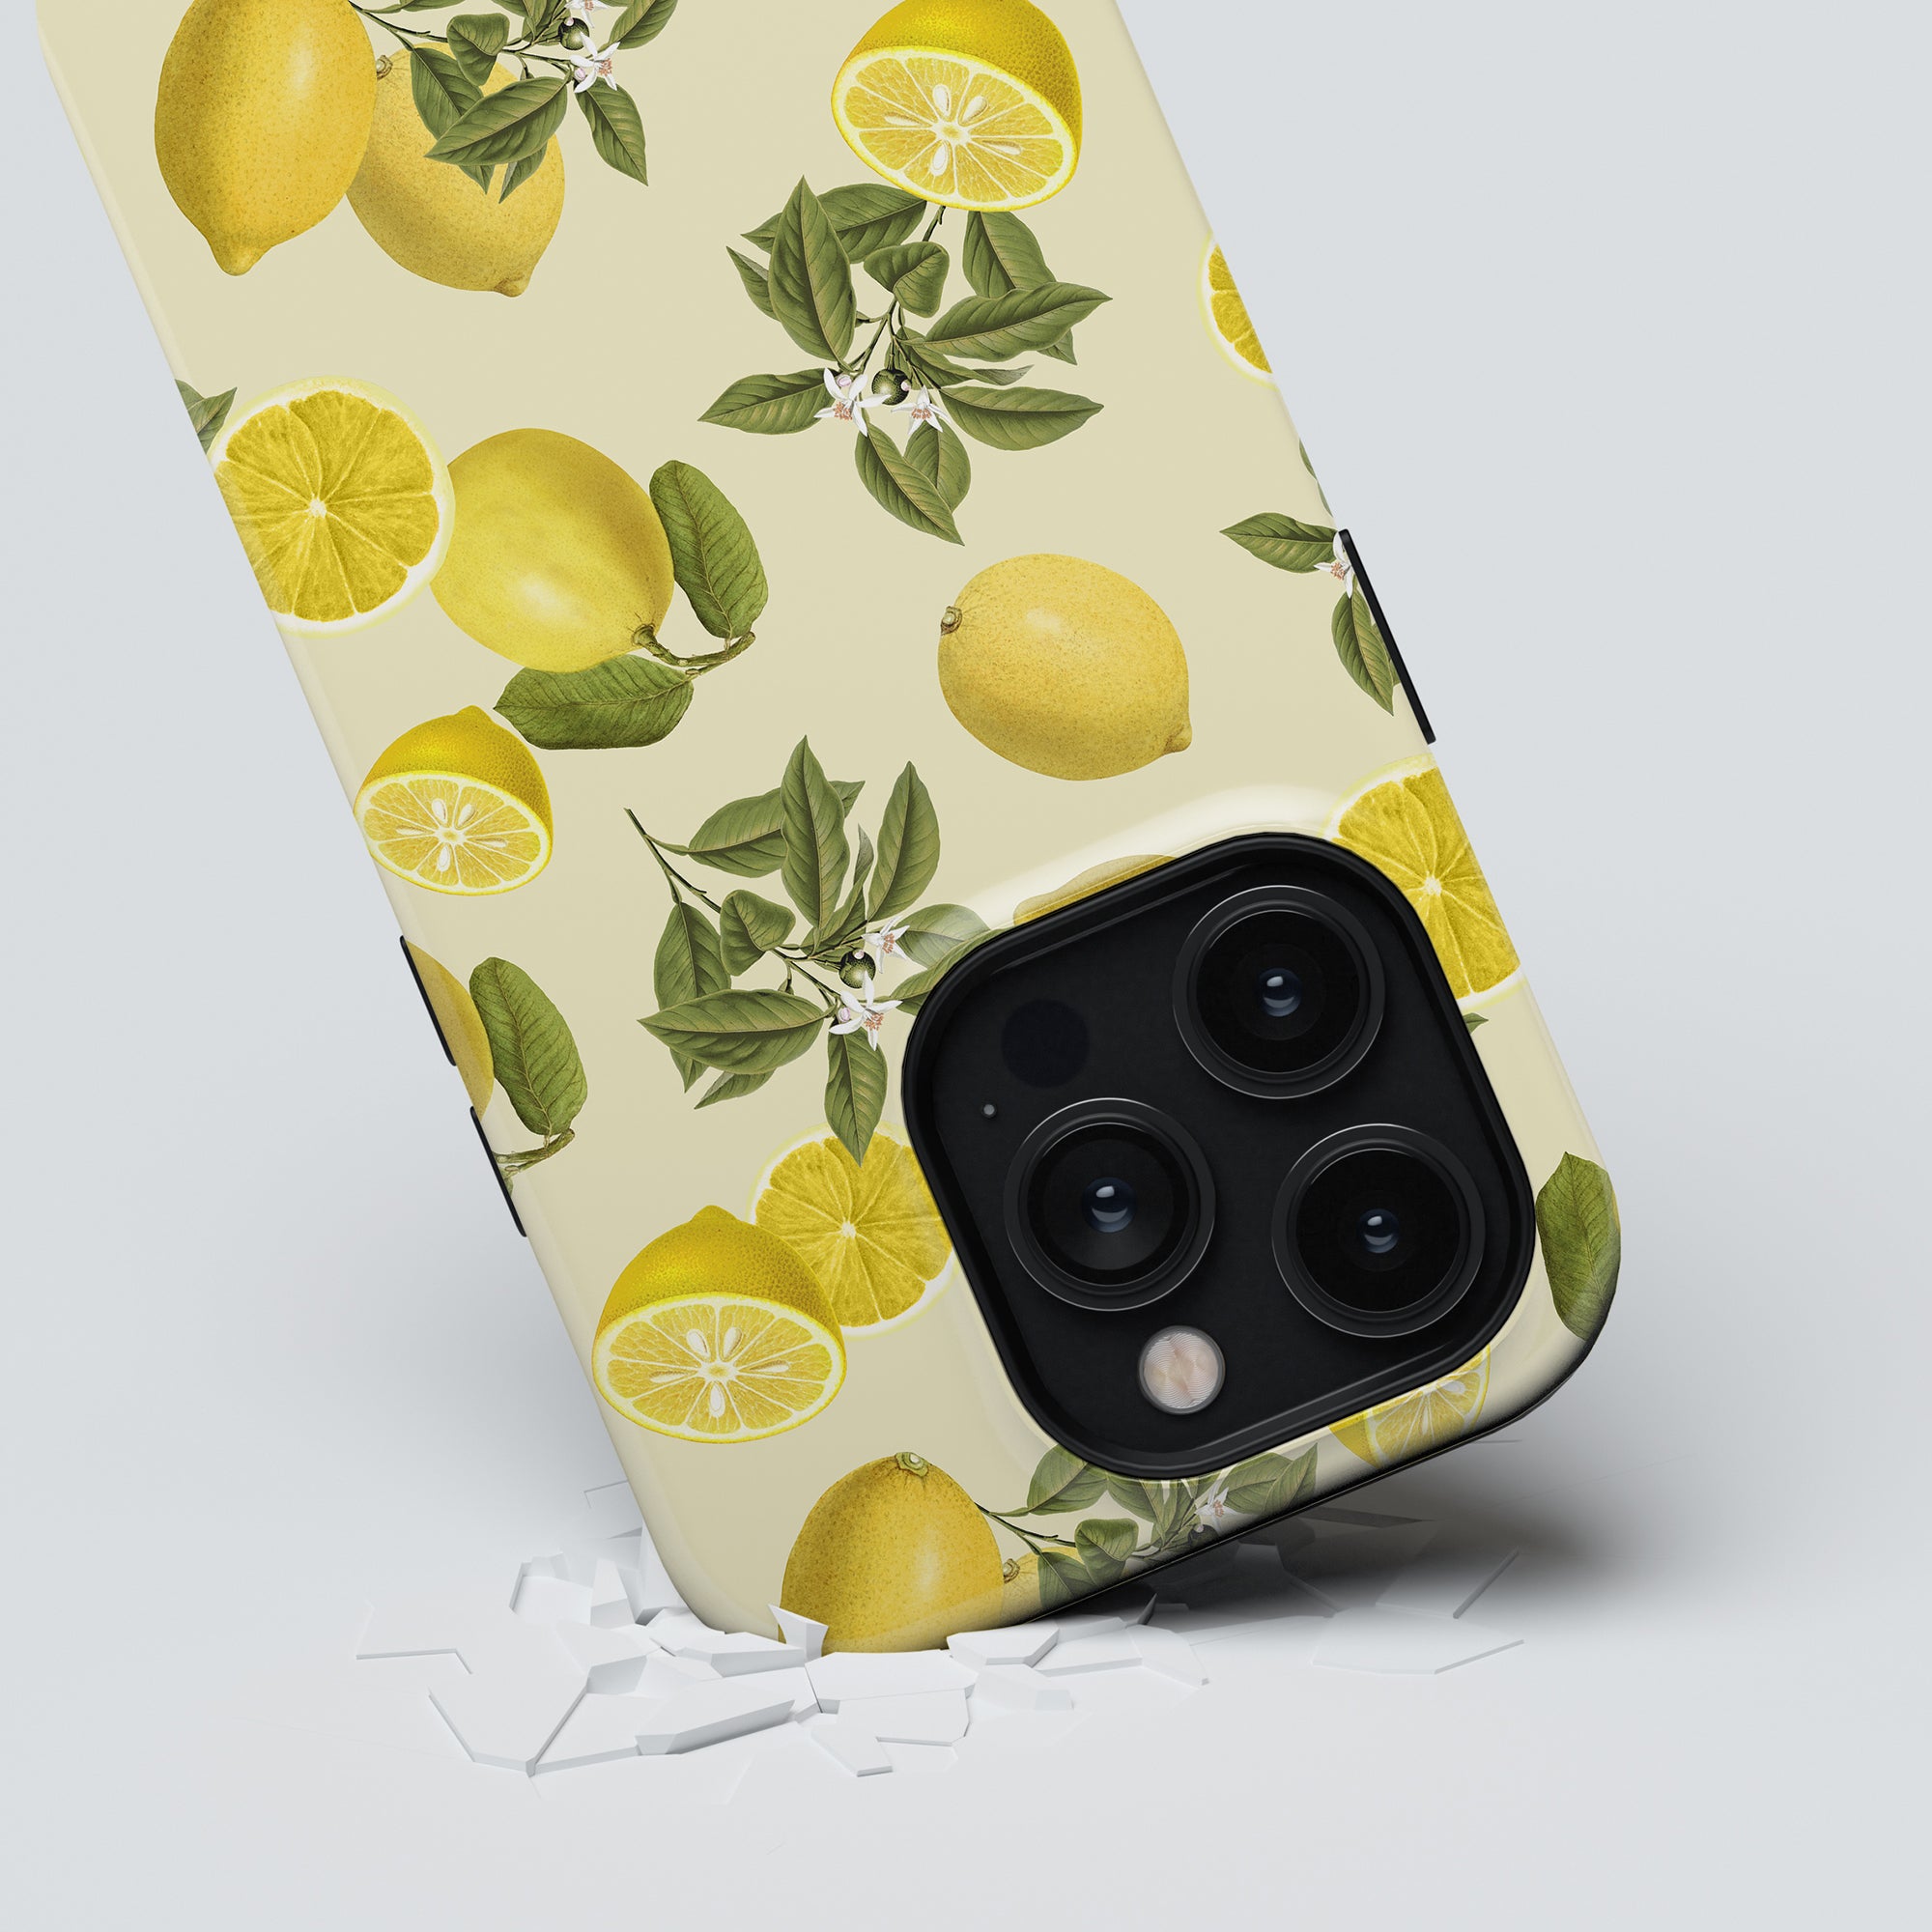 A smartphone with a Limon - Tough Case lying on a cracked surface.